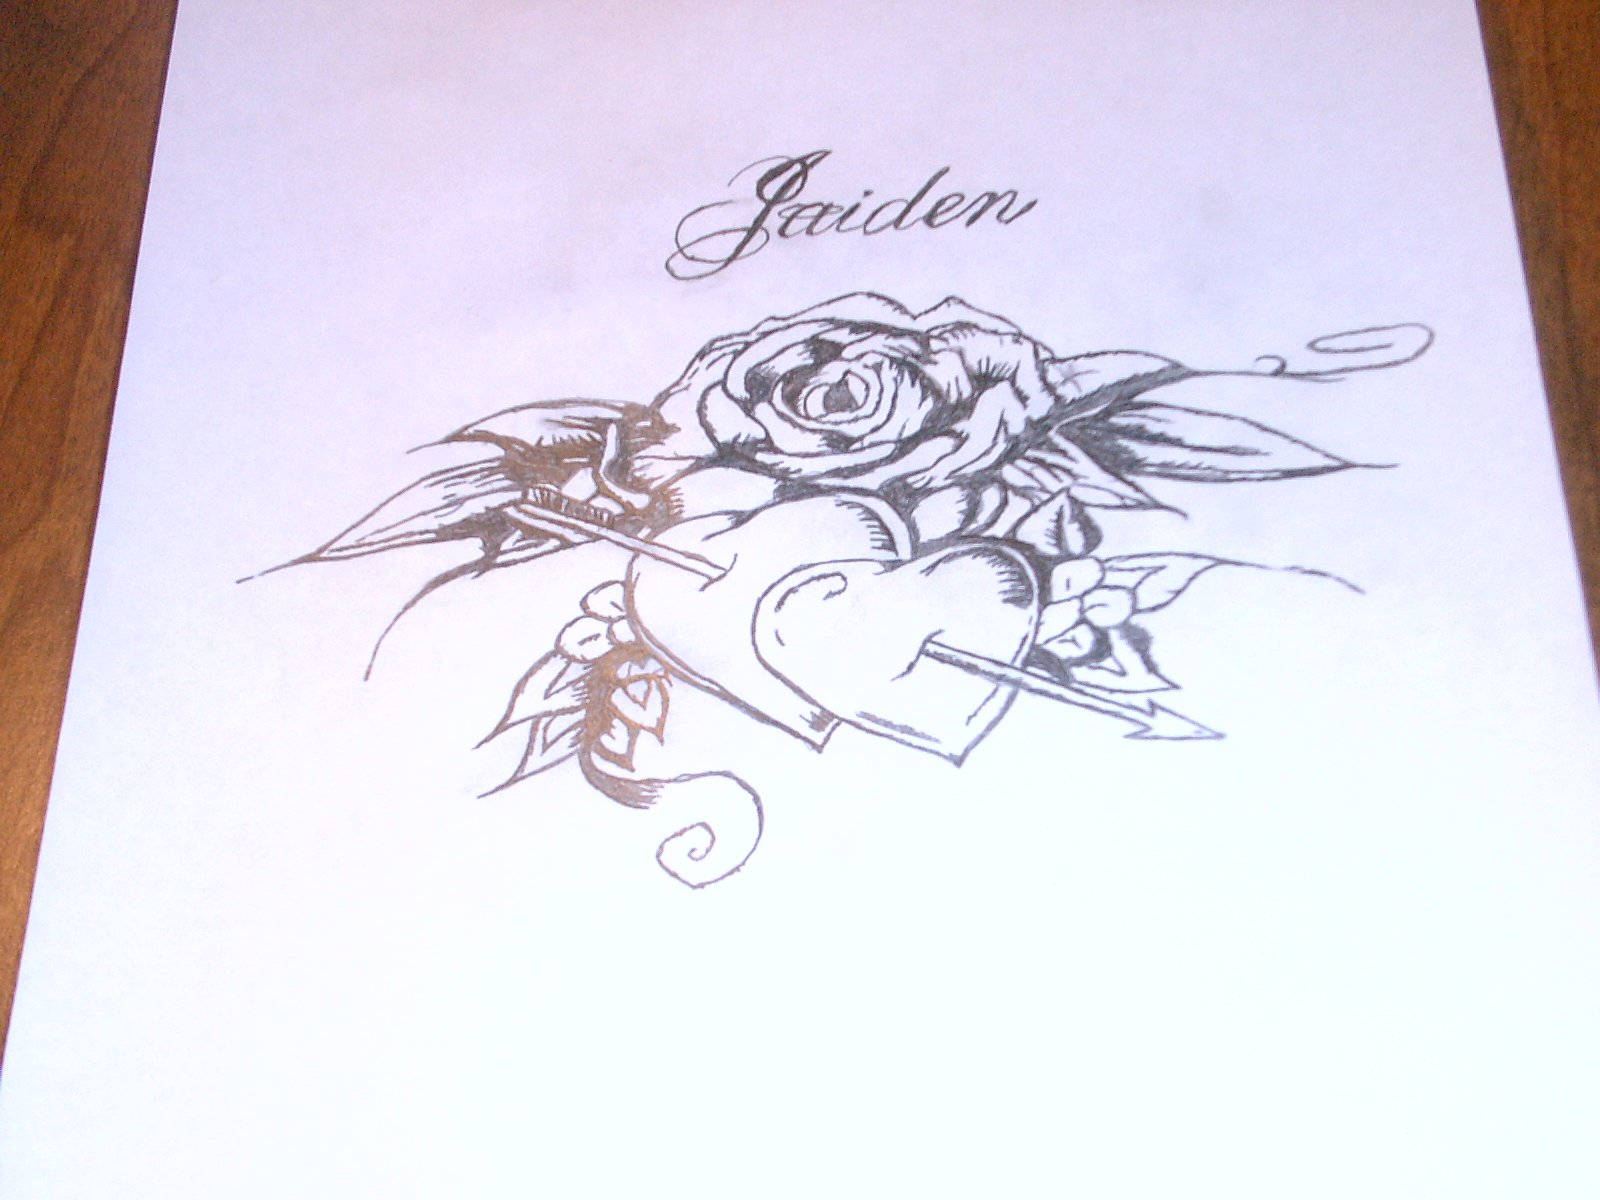 Rose heart son tribute - Tats an drawings - Tattoo Gallery - Ink ...